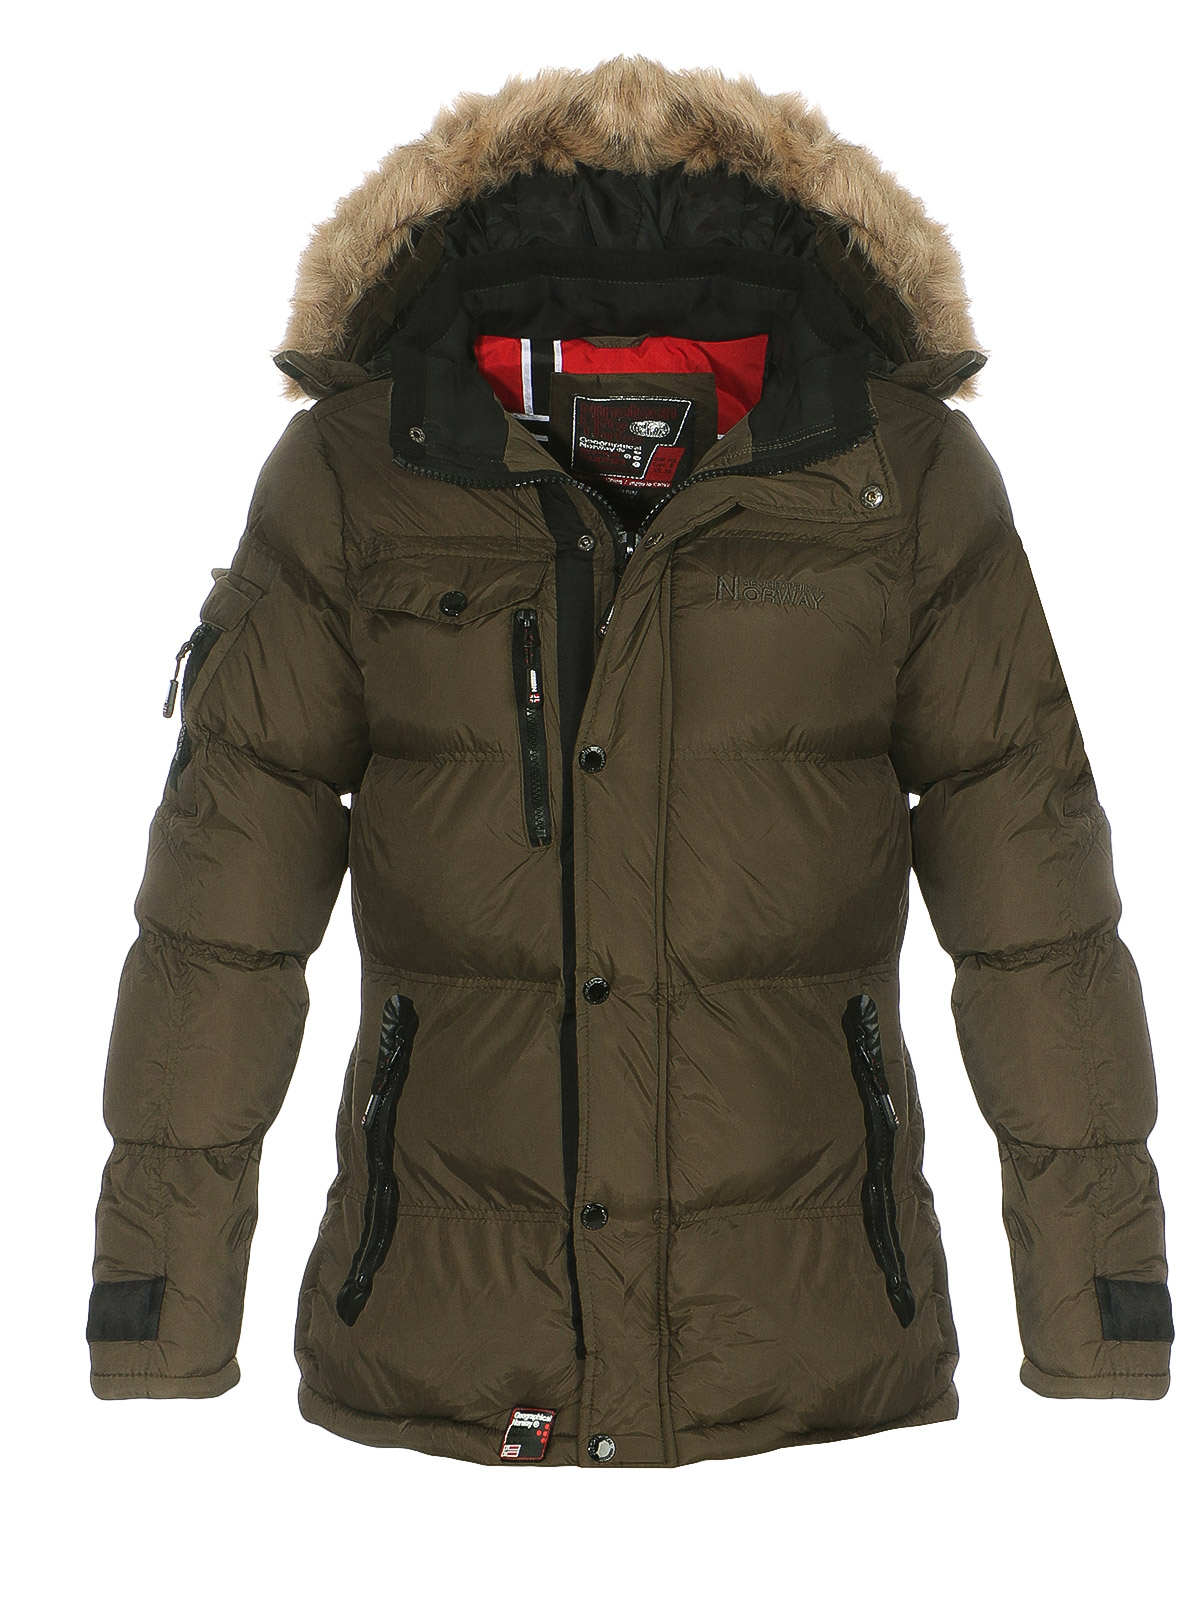 Geographical Norway Men's/Ladies Partner Jacket Quilted Winter Jacket S ...